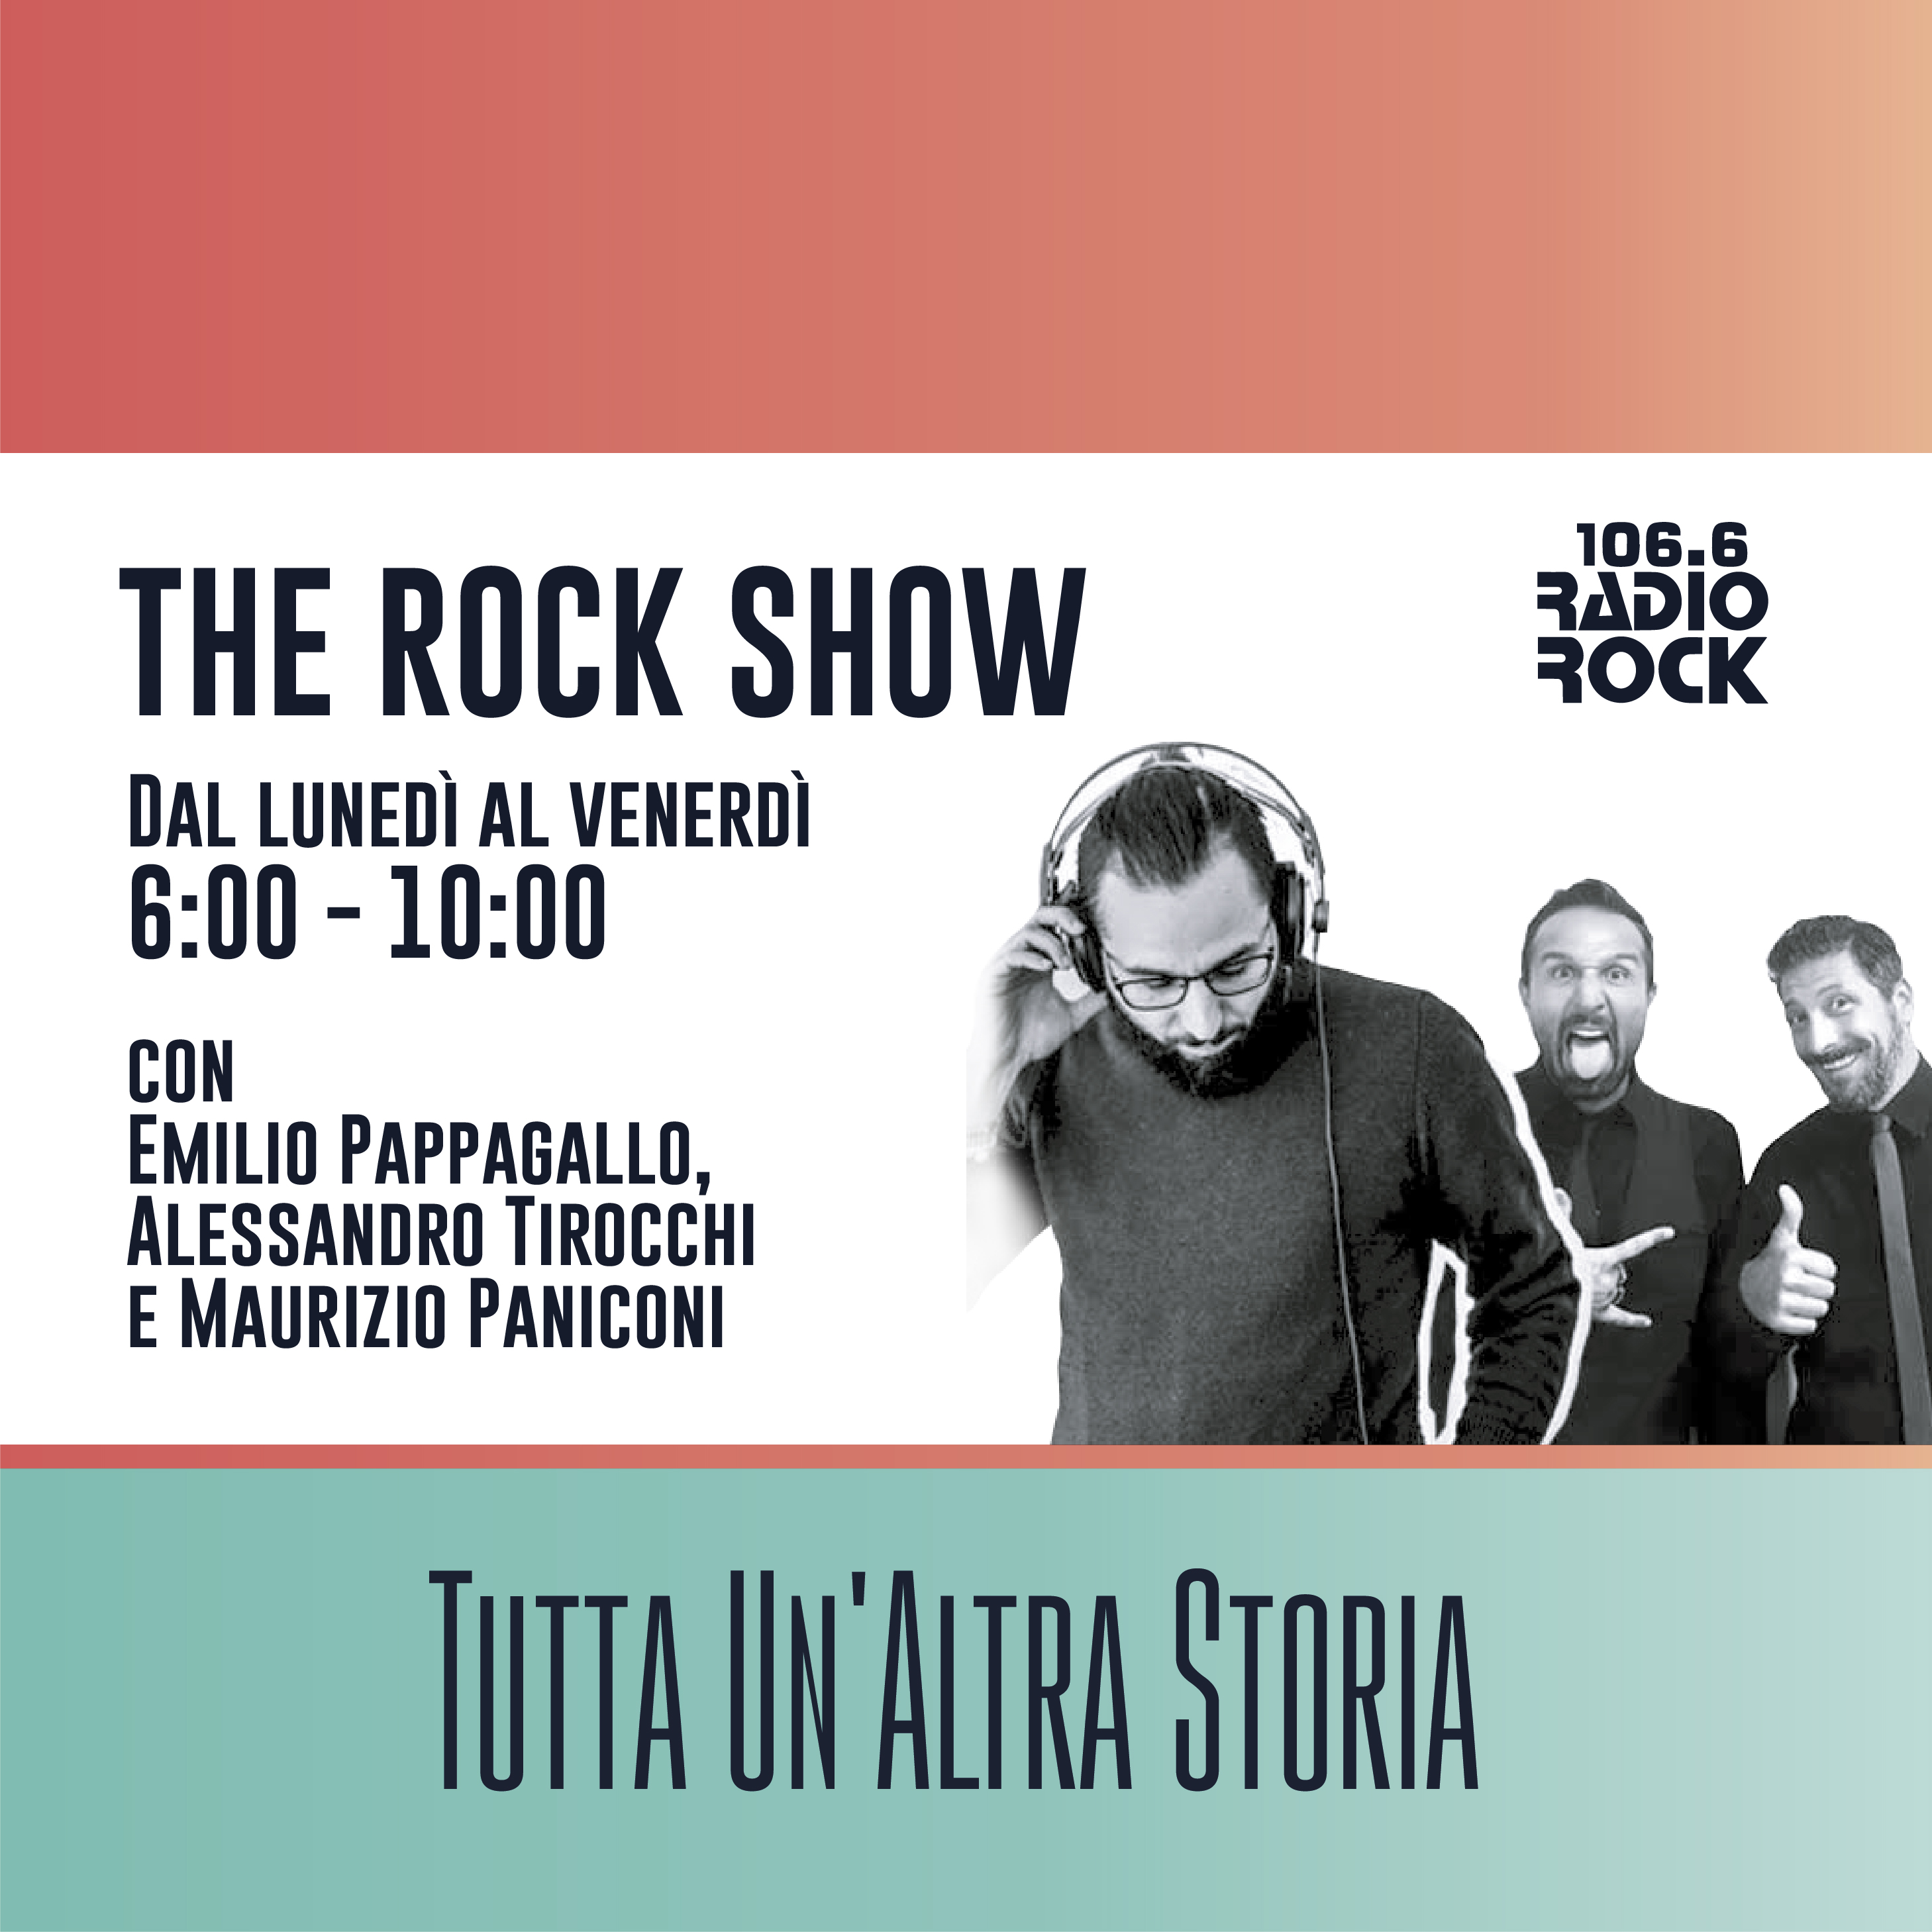 The Rock Show: Cose nuove (08-03-21)